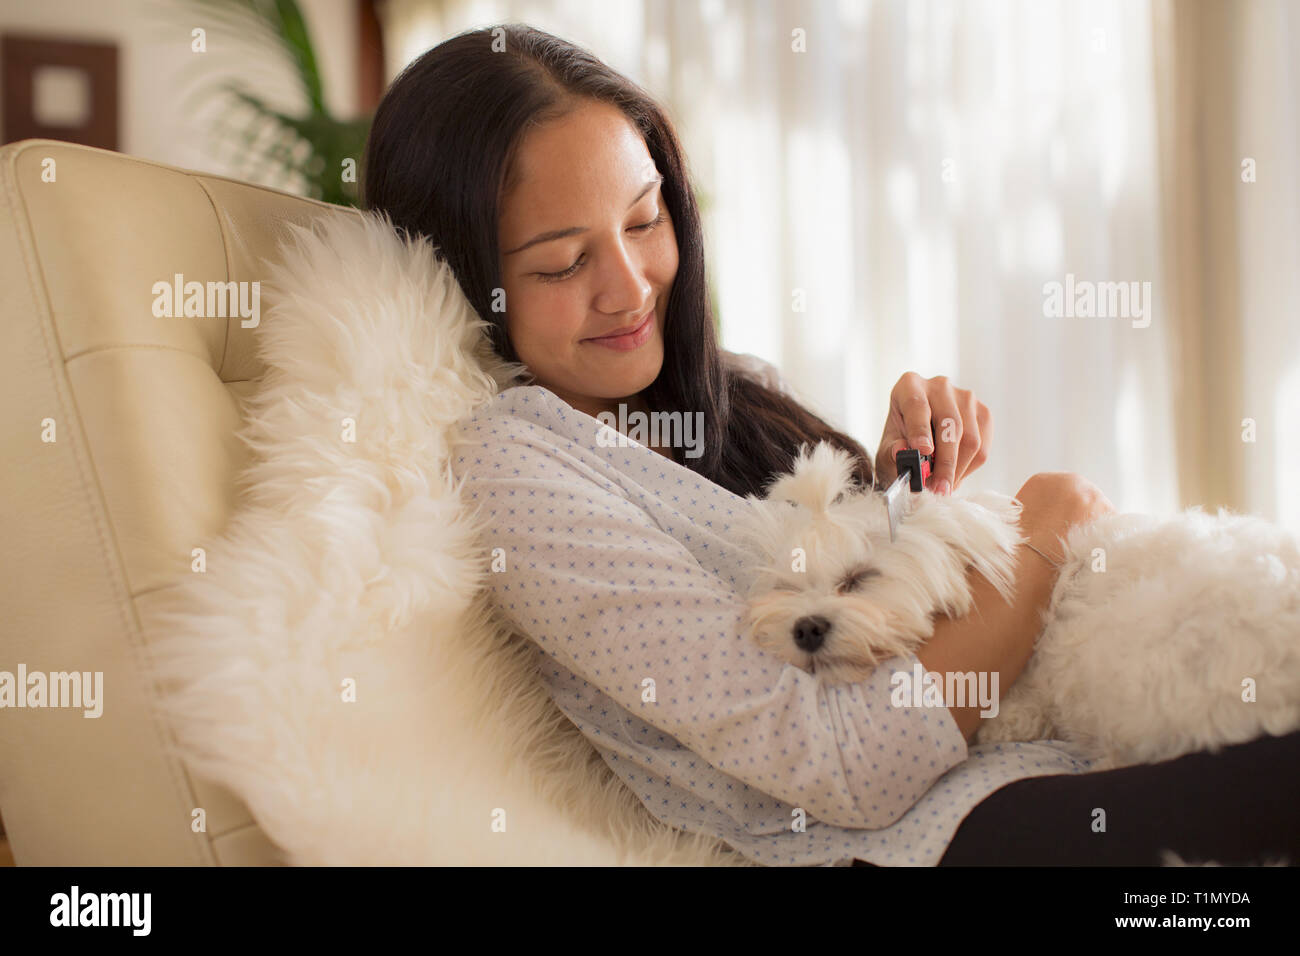 Smiling young woman brushing sleeping dog Banque D'Images